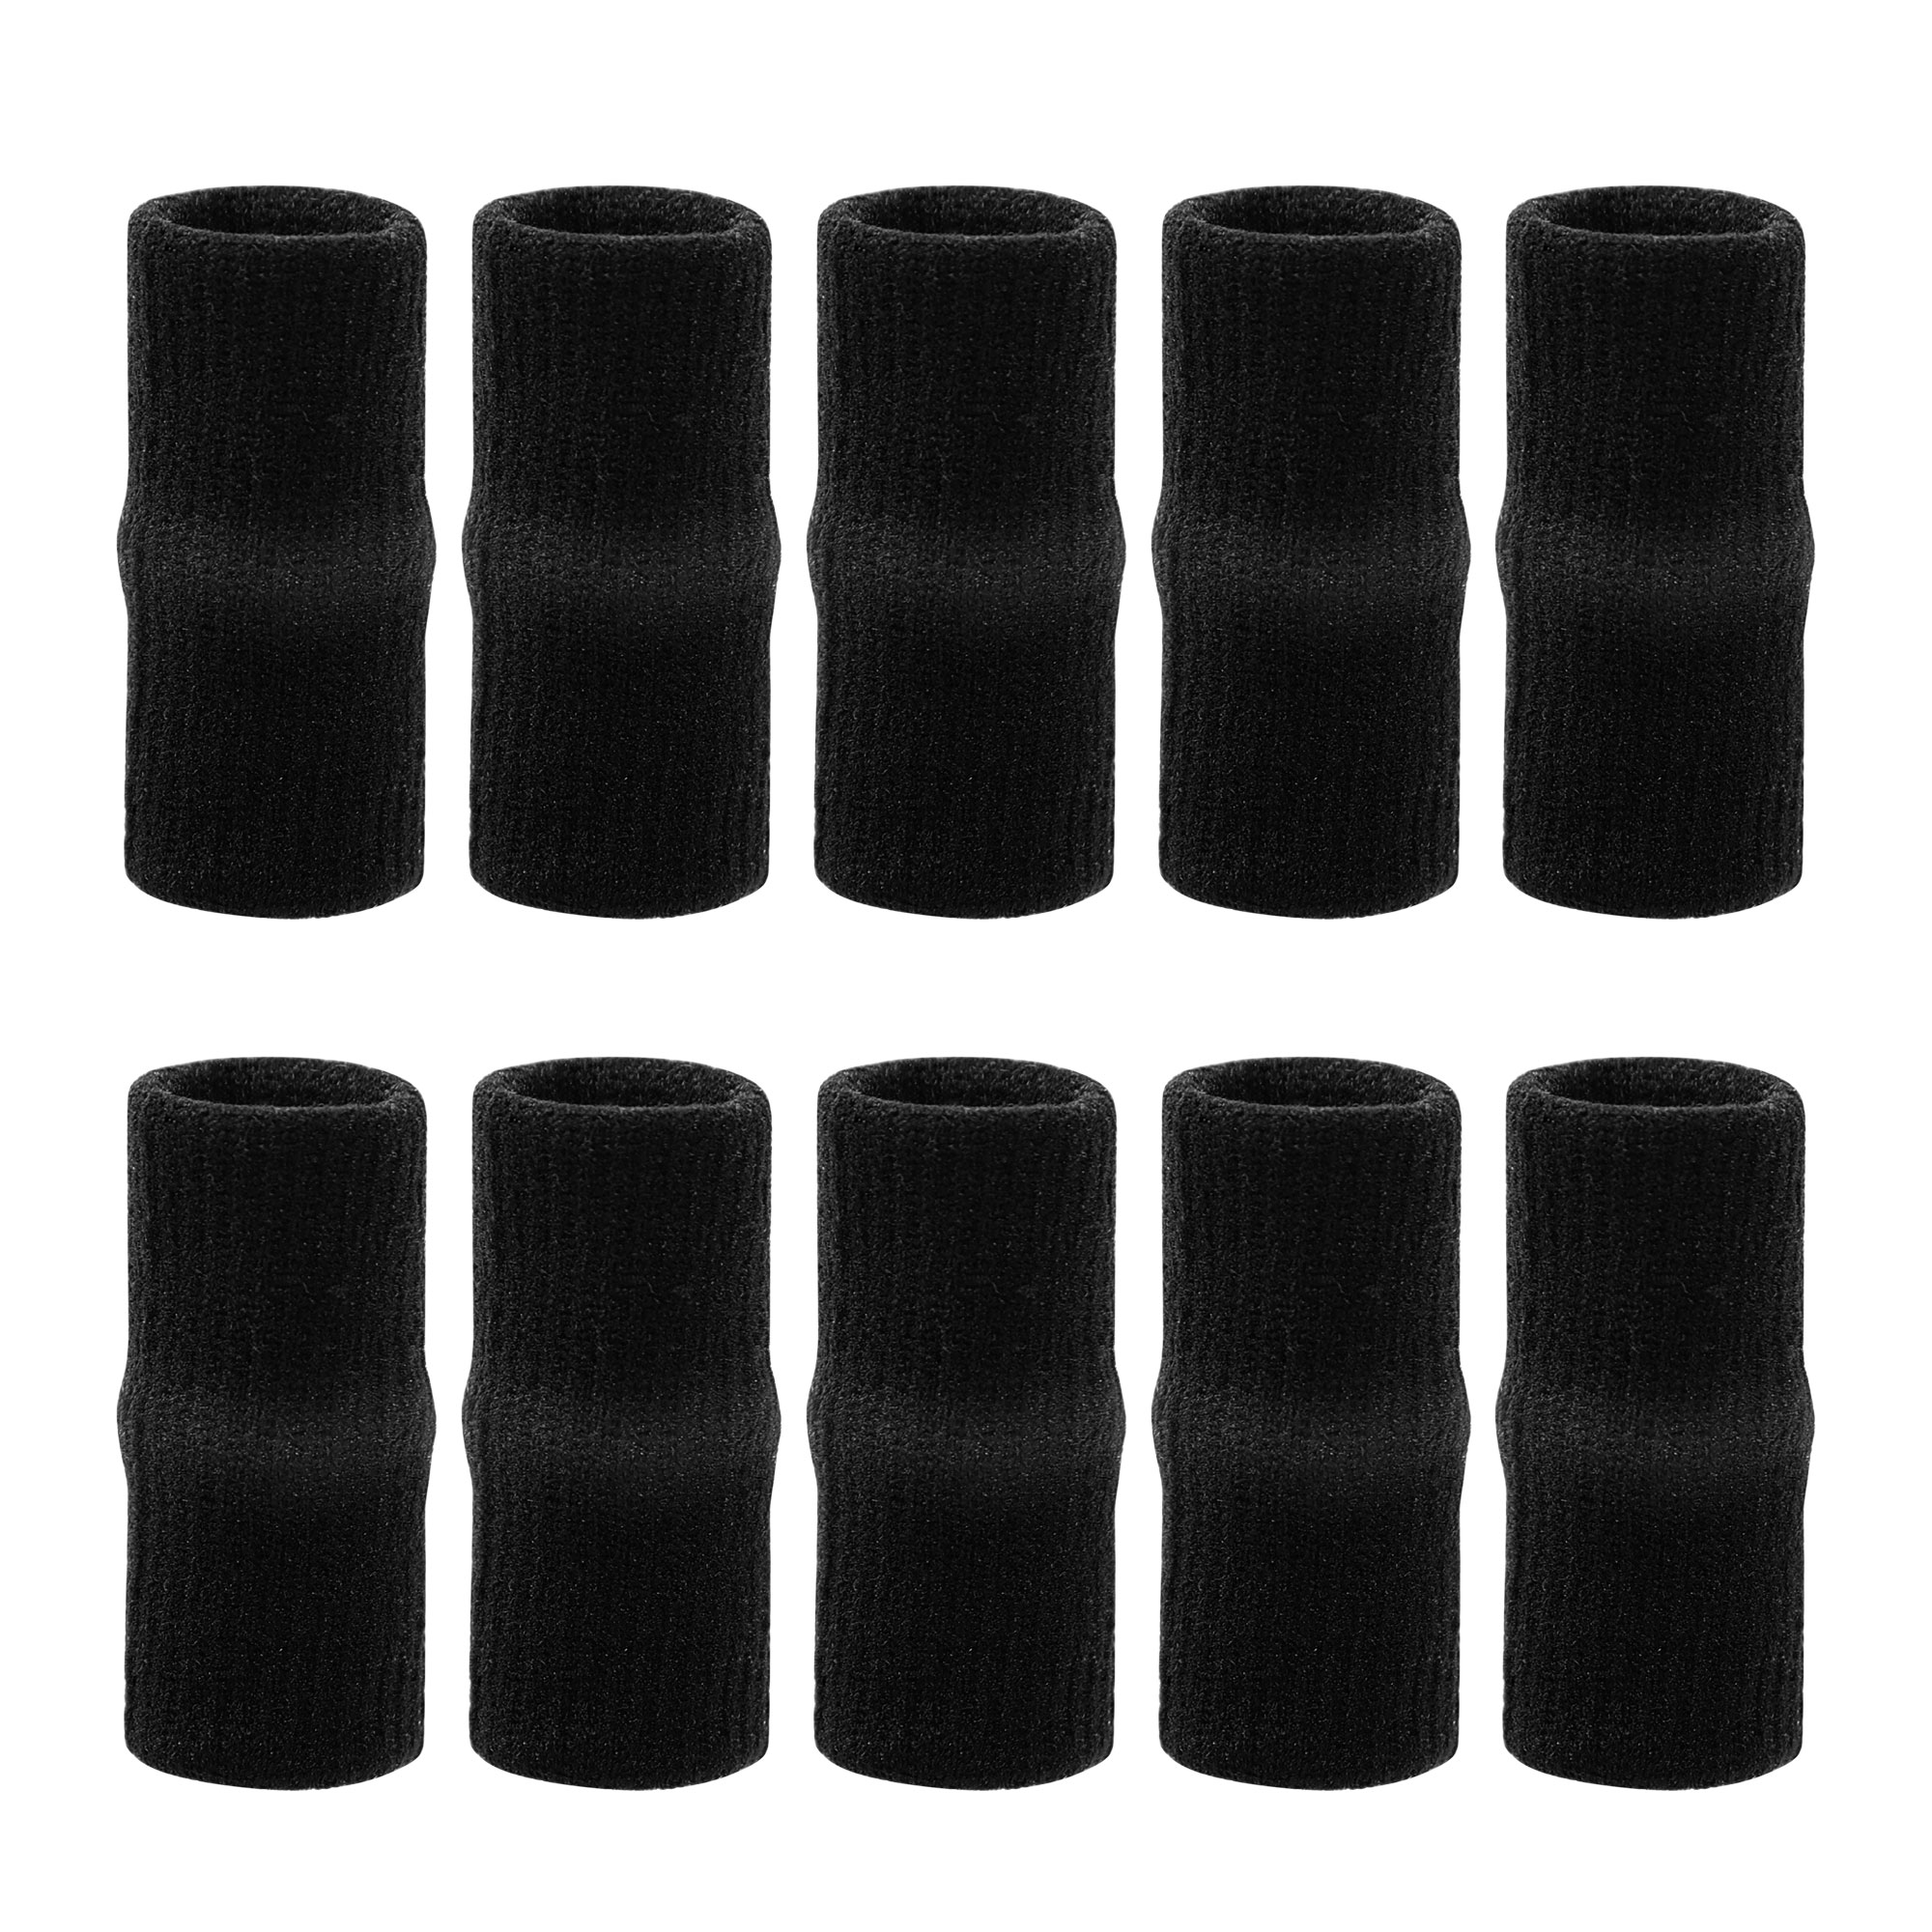 Unique Bargains 10Pcs Stretchy Sports Finger Support Basketball Finger Sleeves Protector for Unisex